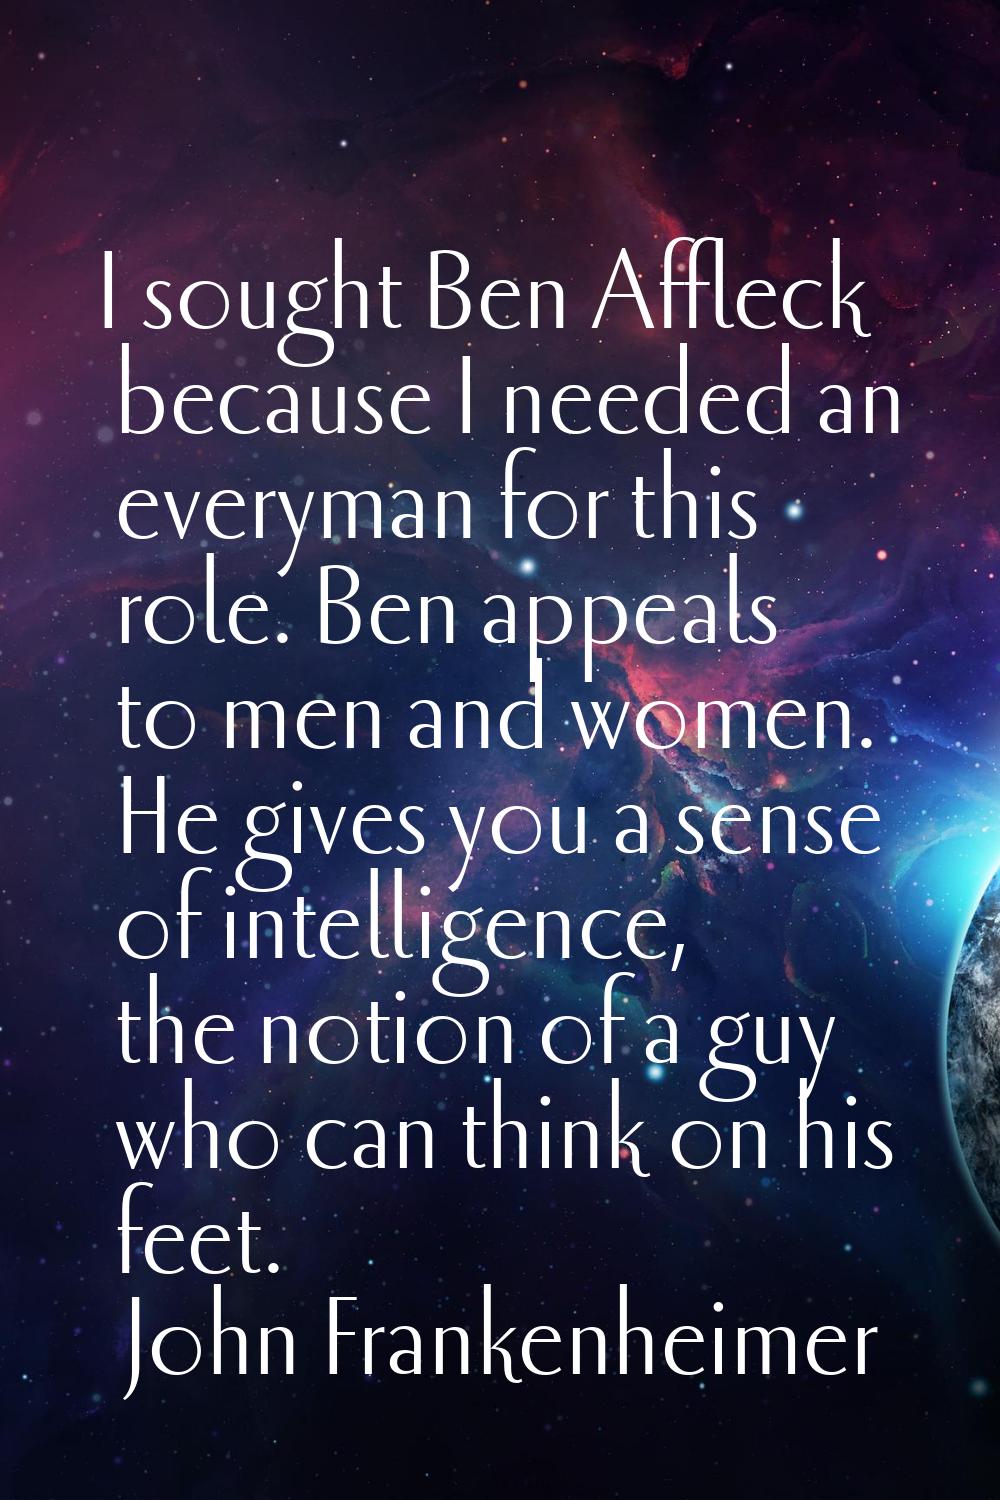 I sought Ben Affleck because I needed an everyman for this role. Ben appeals to men and women. He g